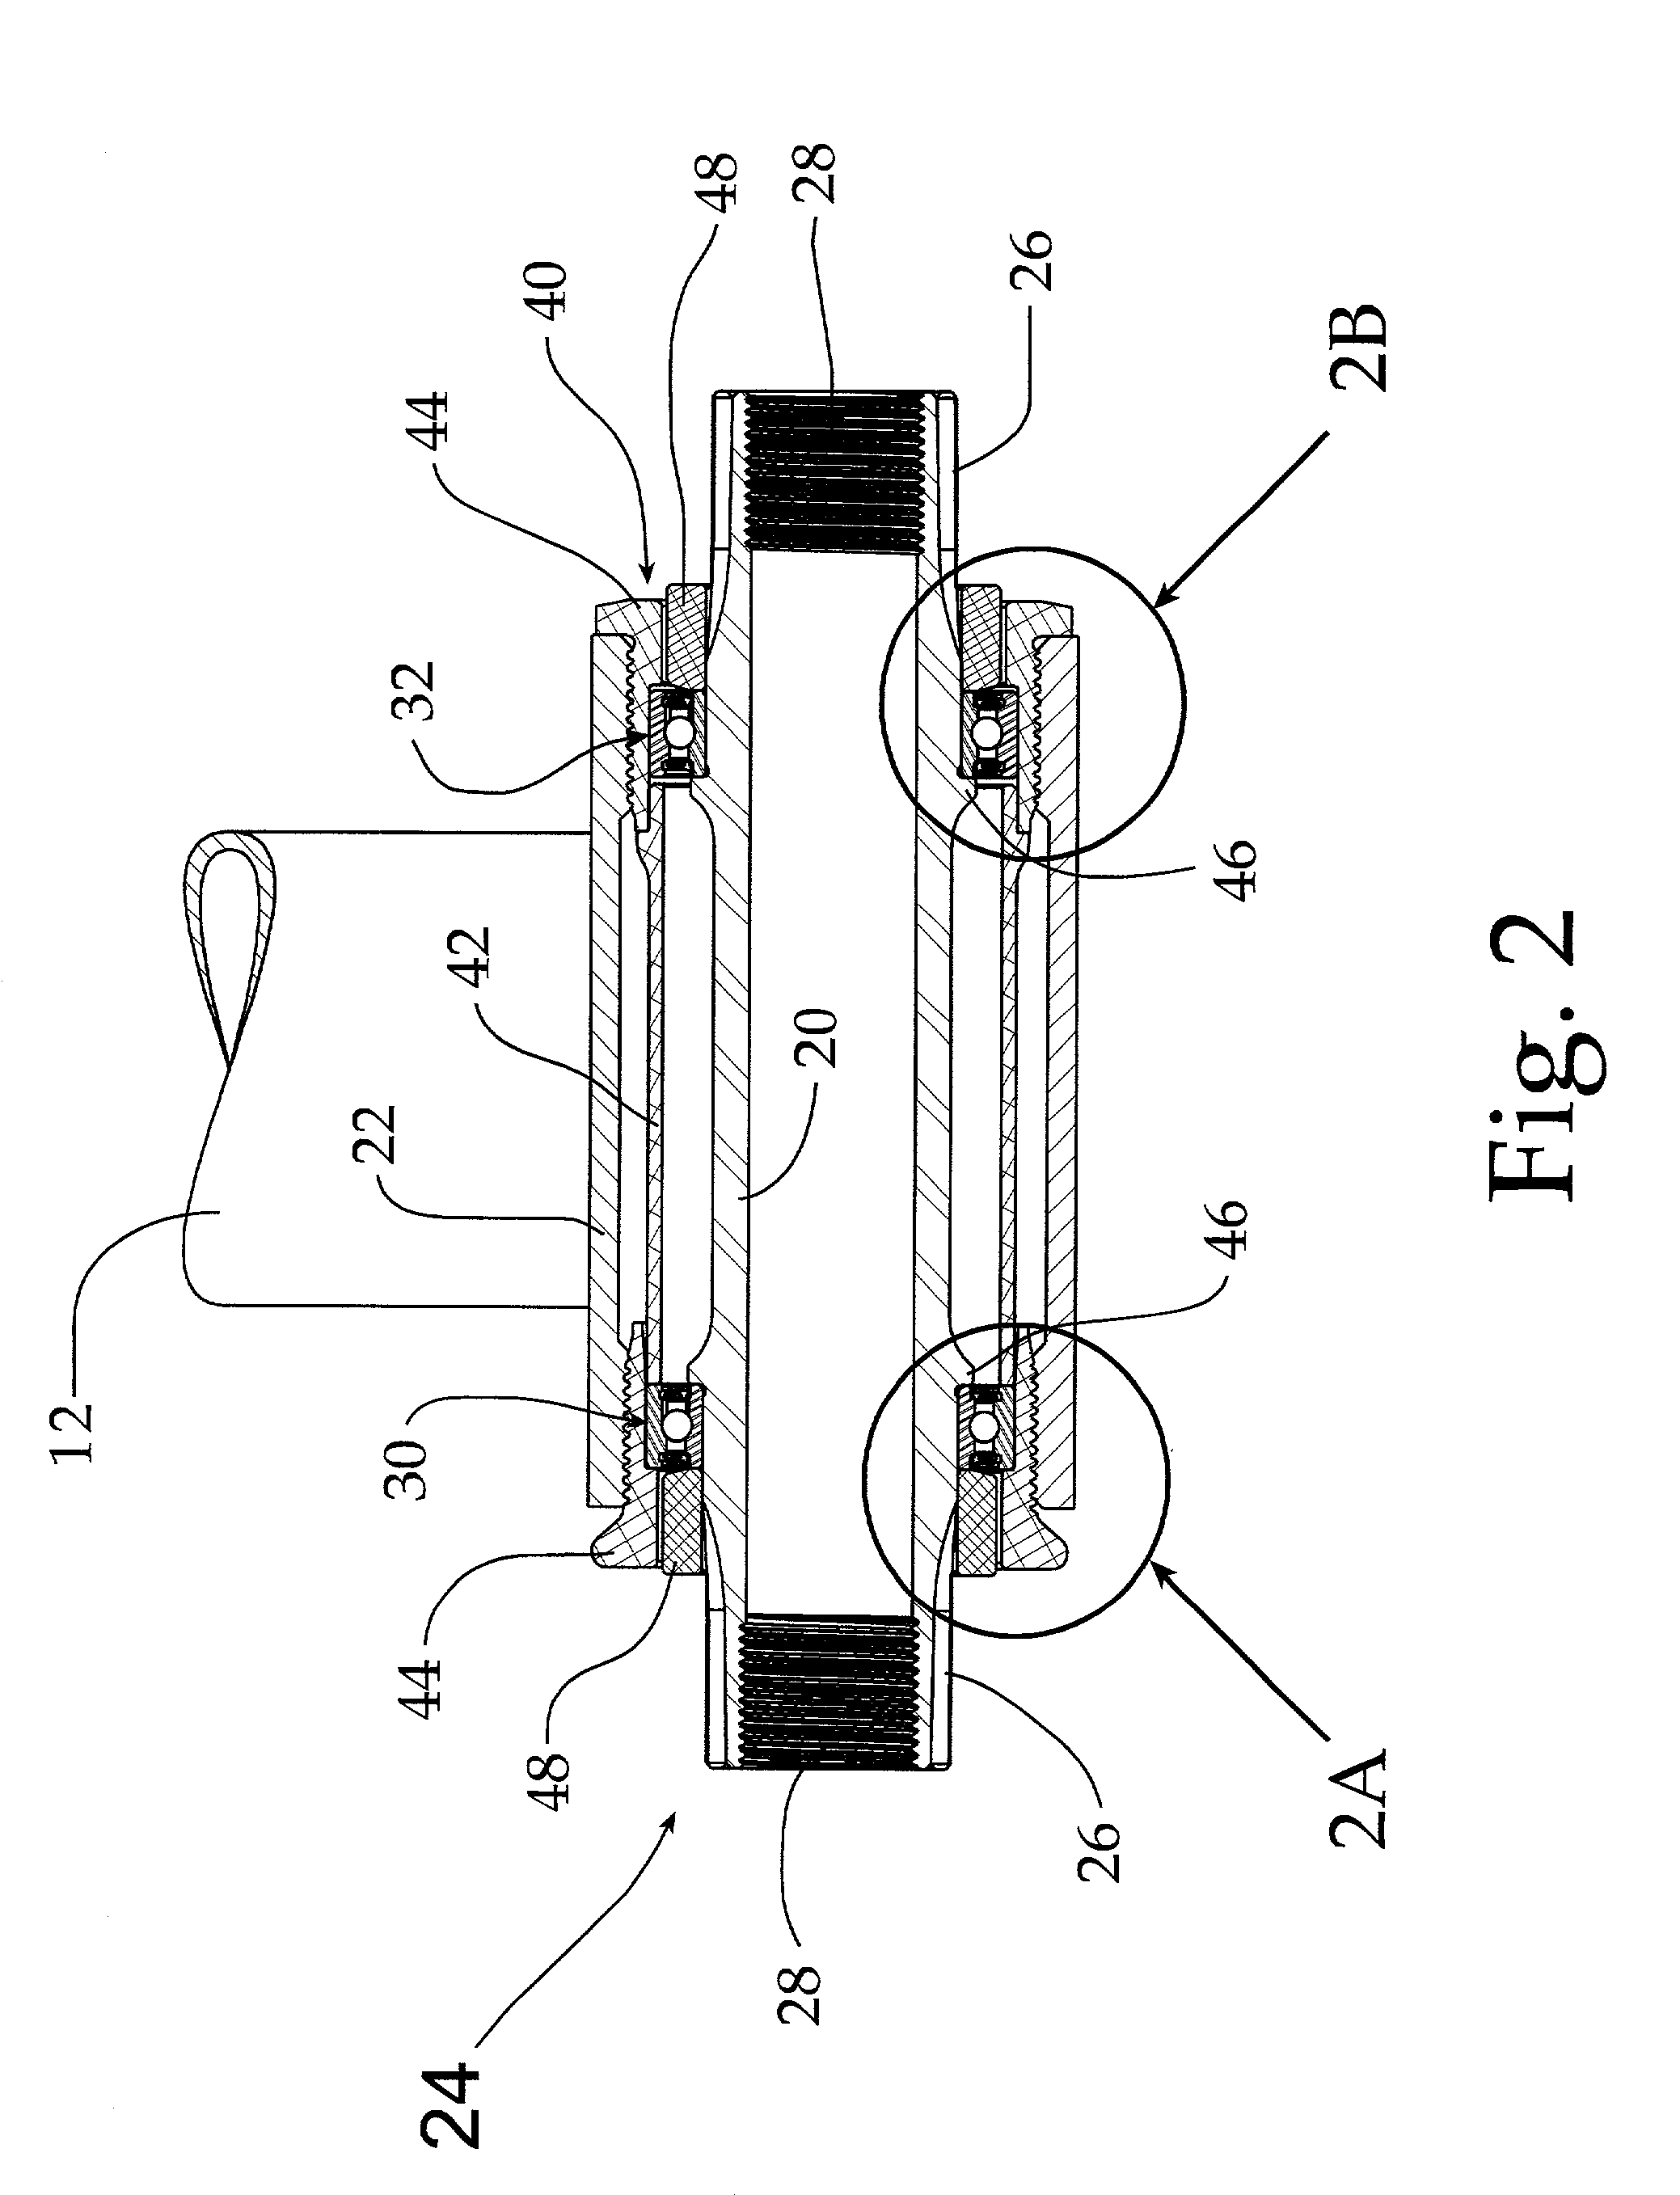 Bicycle crank axle bearing assembly